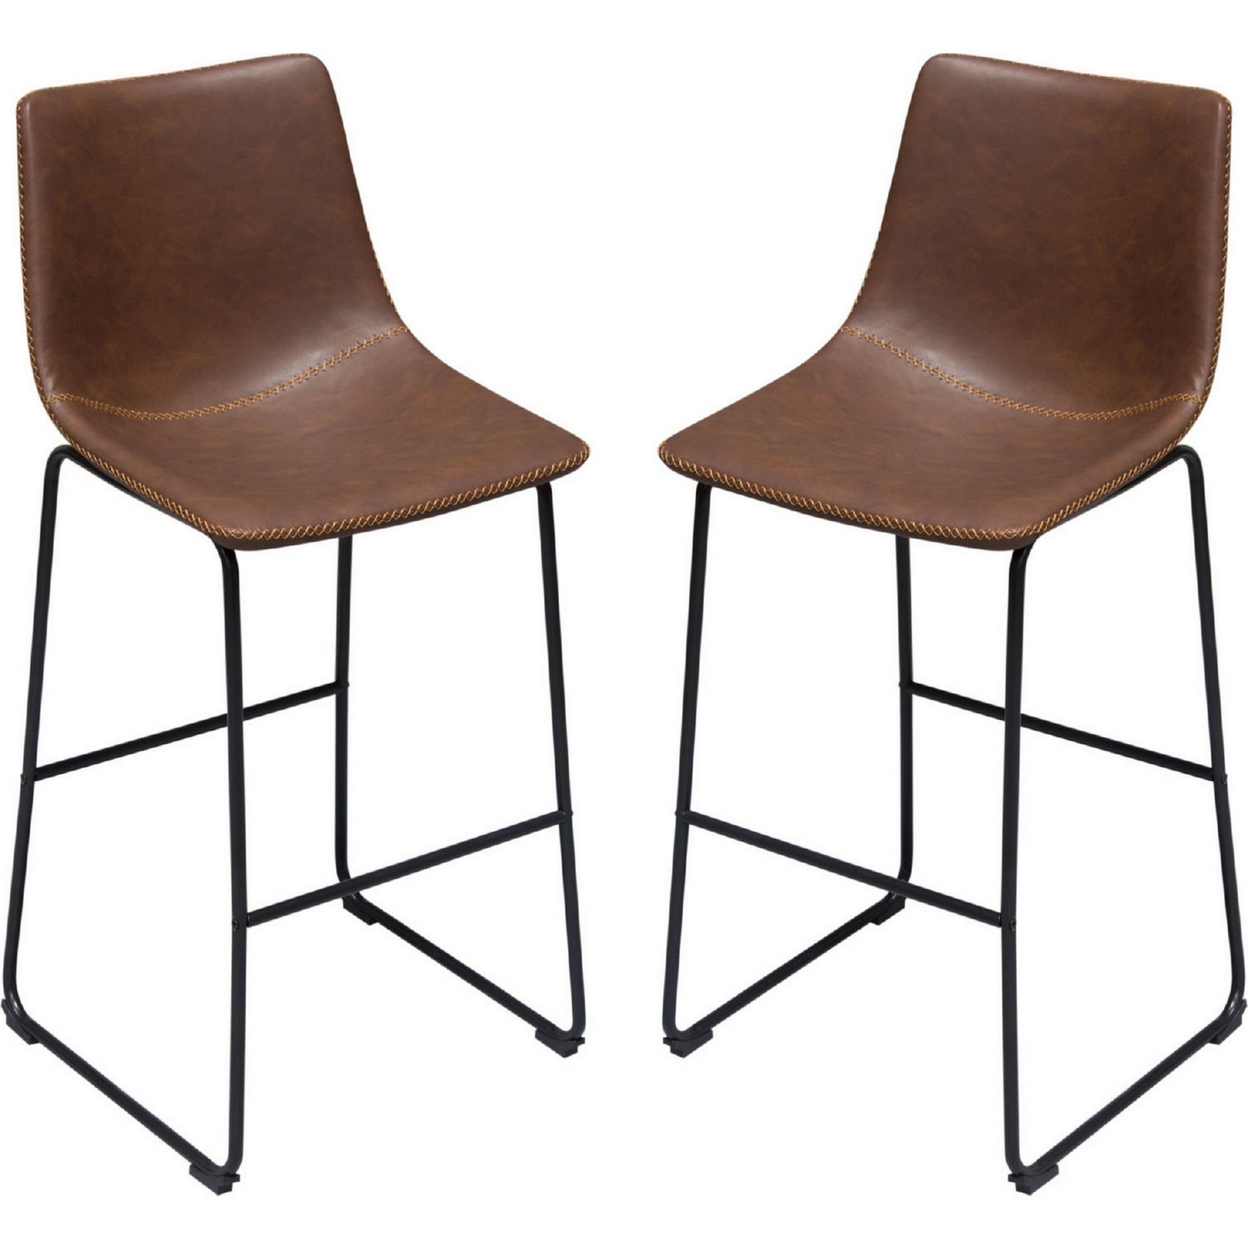 29 Inch Barstool Chair Set Of 2, Brown Faux Leather Upholstery, Black Legs- Saltoro Sherpi